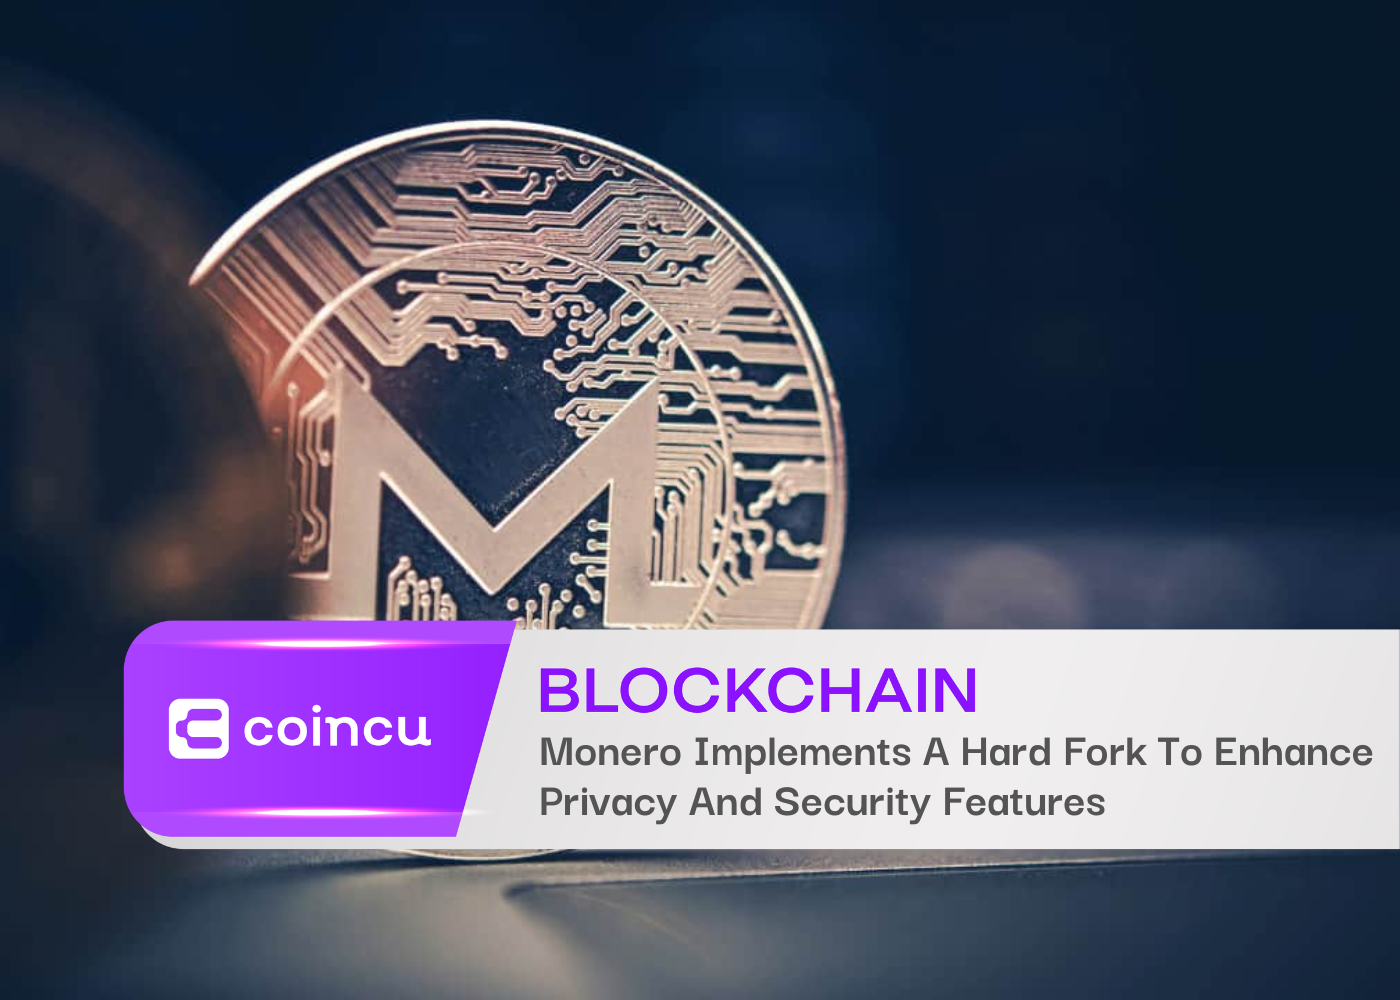 Monero Implements A Hard Fork To Enhance